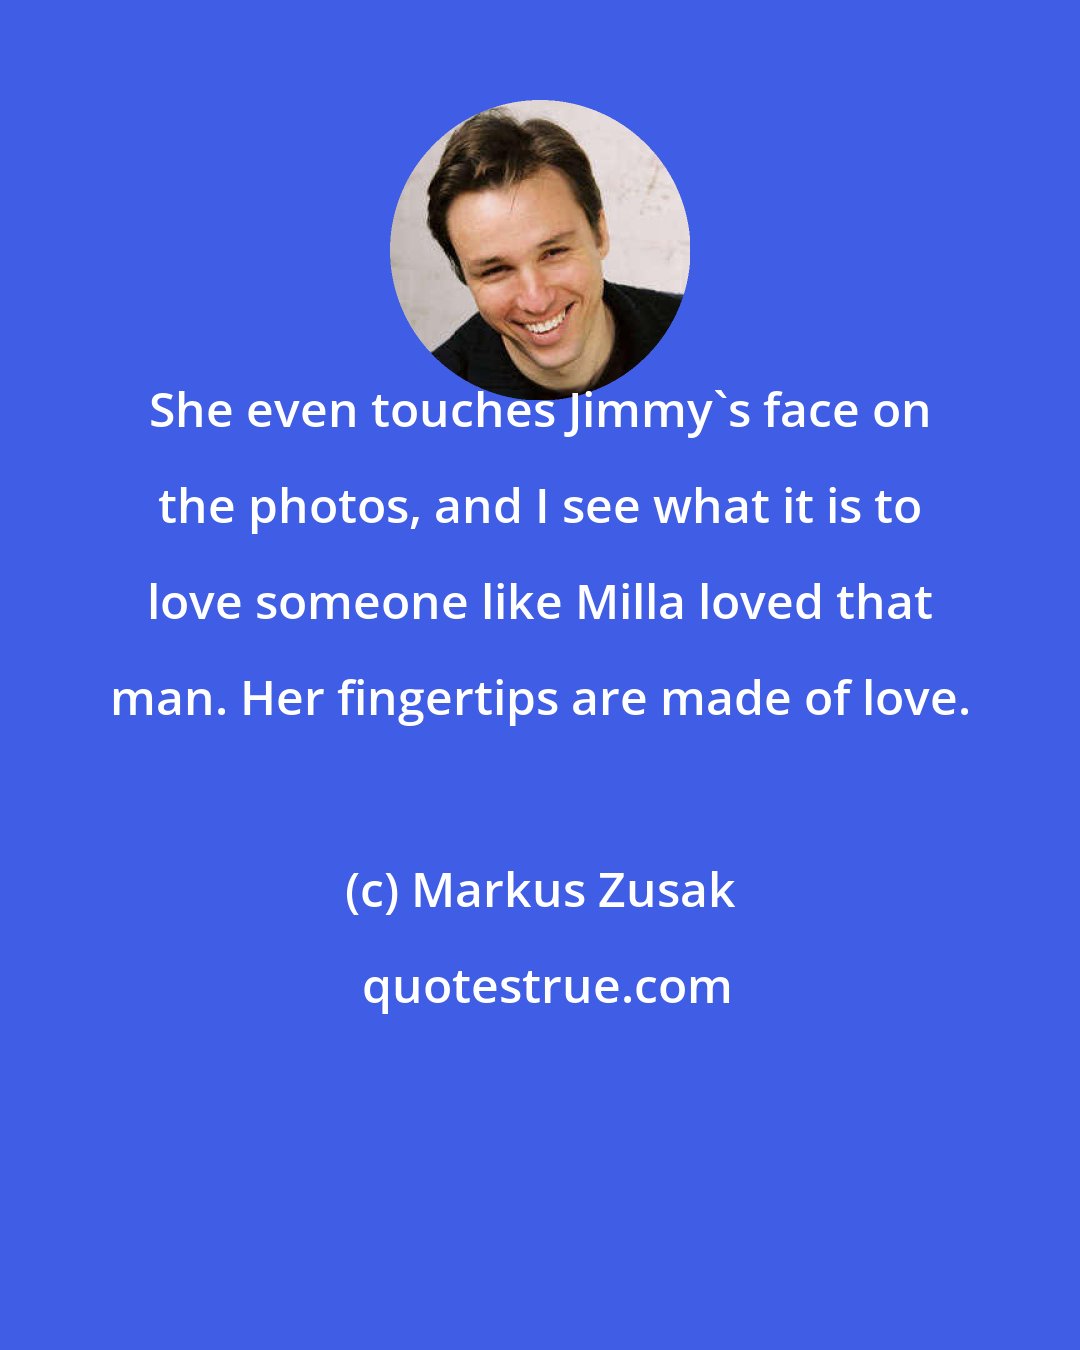 Markus Zusak: She even touches Jimmy's face on the photos, and I see what it is to love someone like Milla loved that man. Her fingertips are made of love.